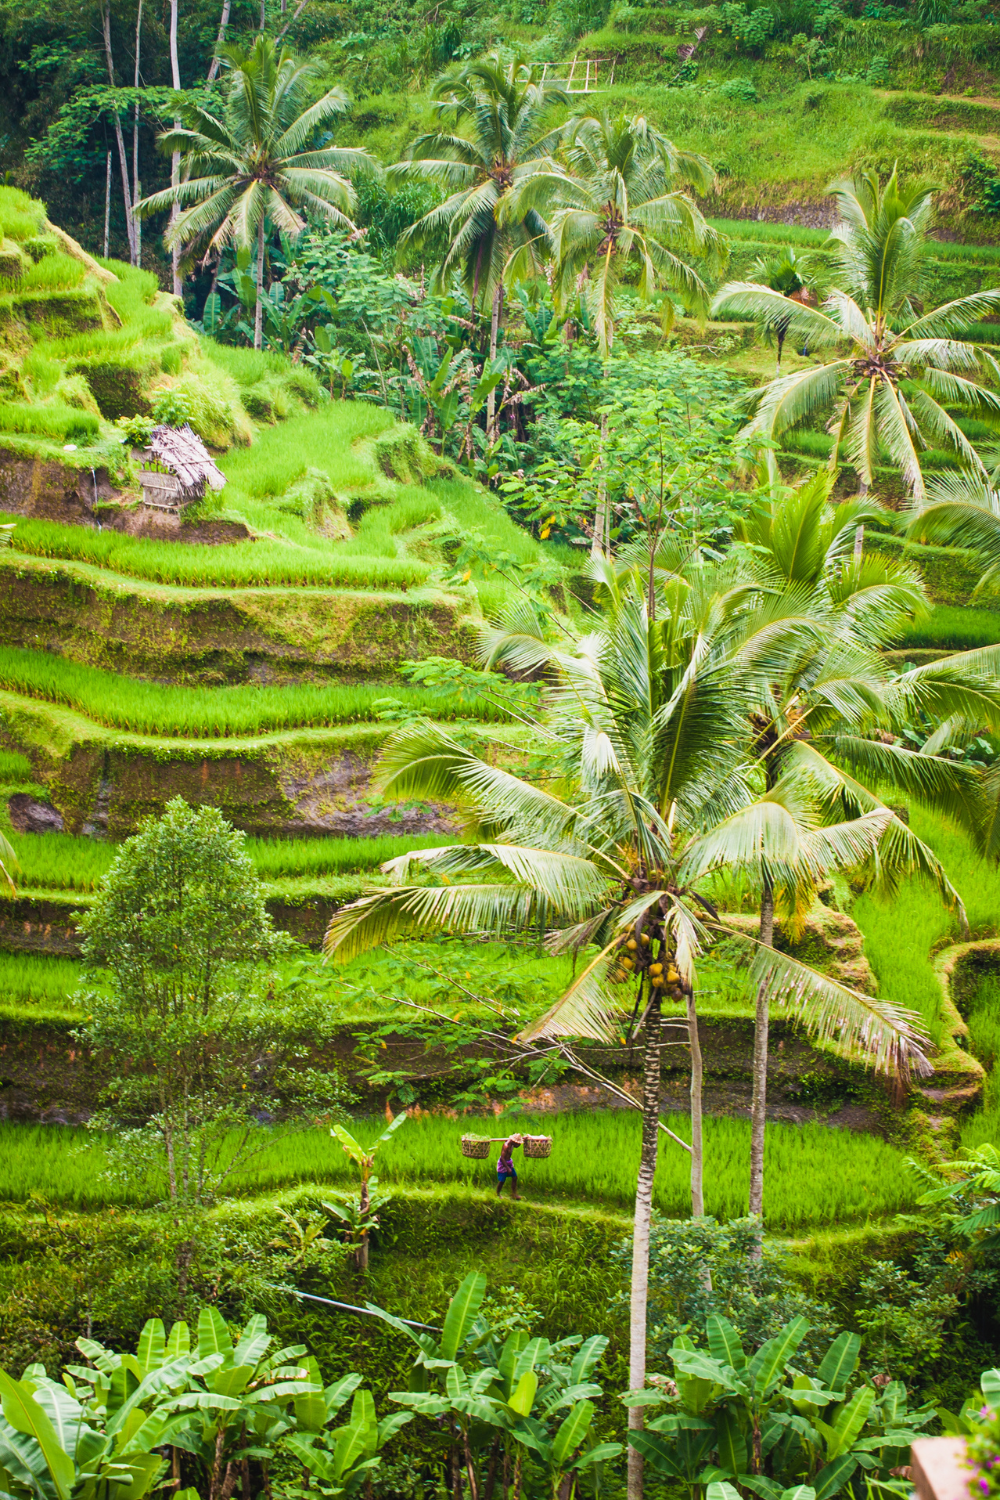 Corp fields on mountain side in Ubud, Indonesia